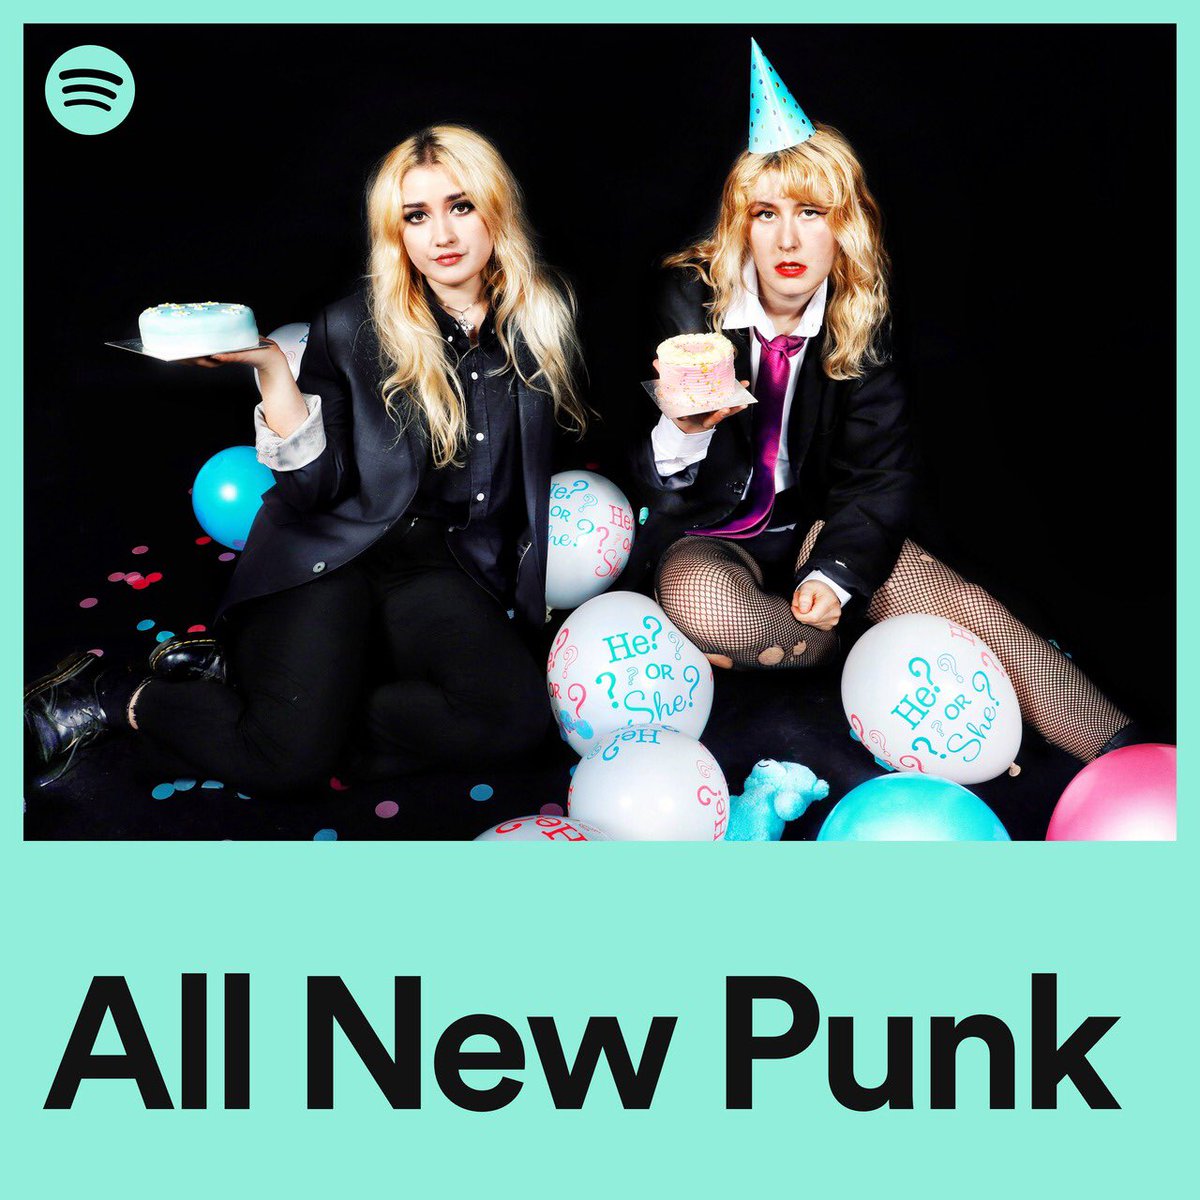 Thank ya for making us cover gays once again @SpotifyUK 💥🤝